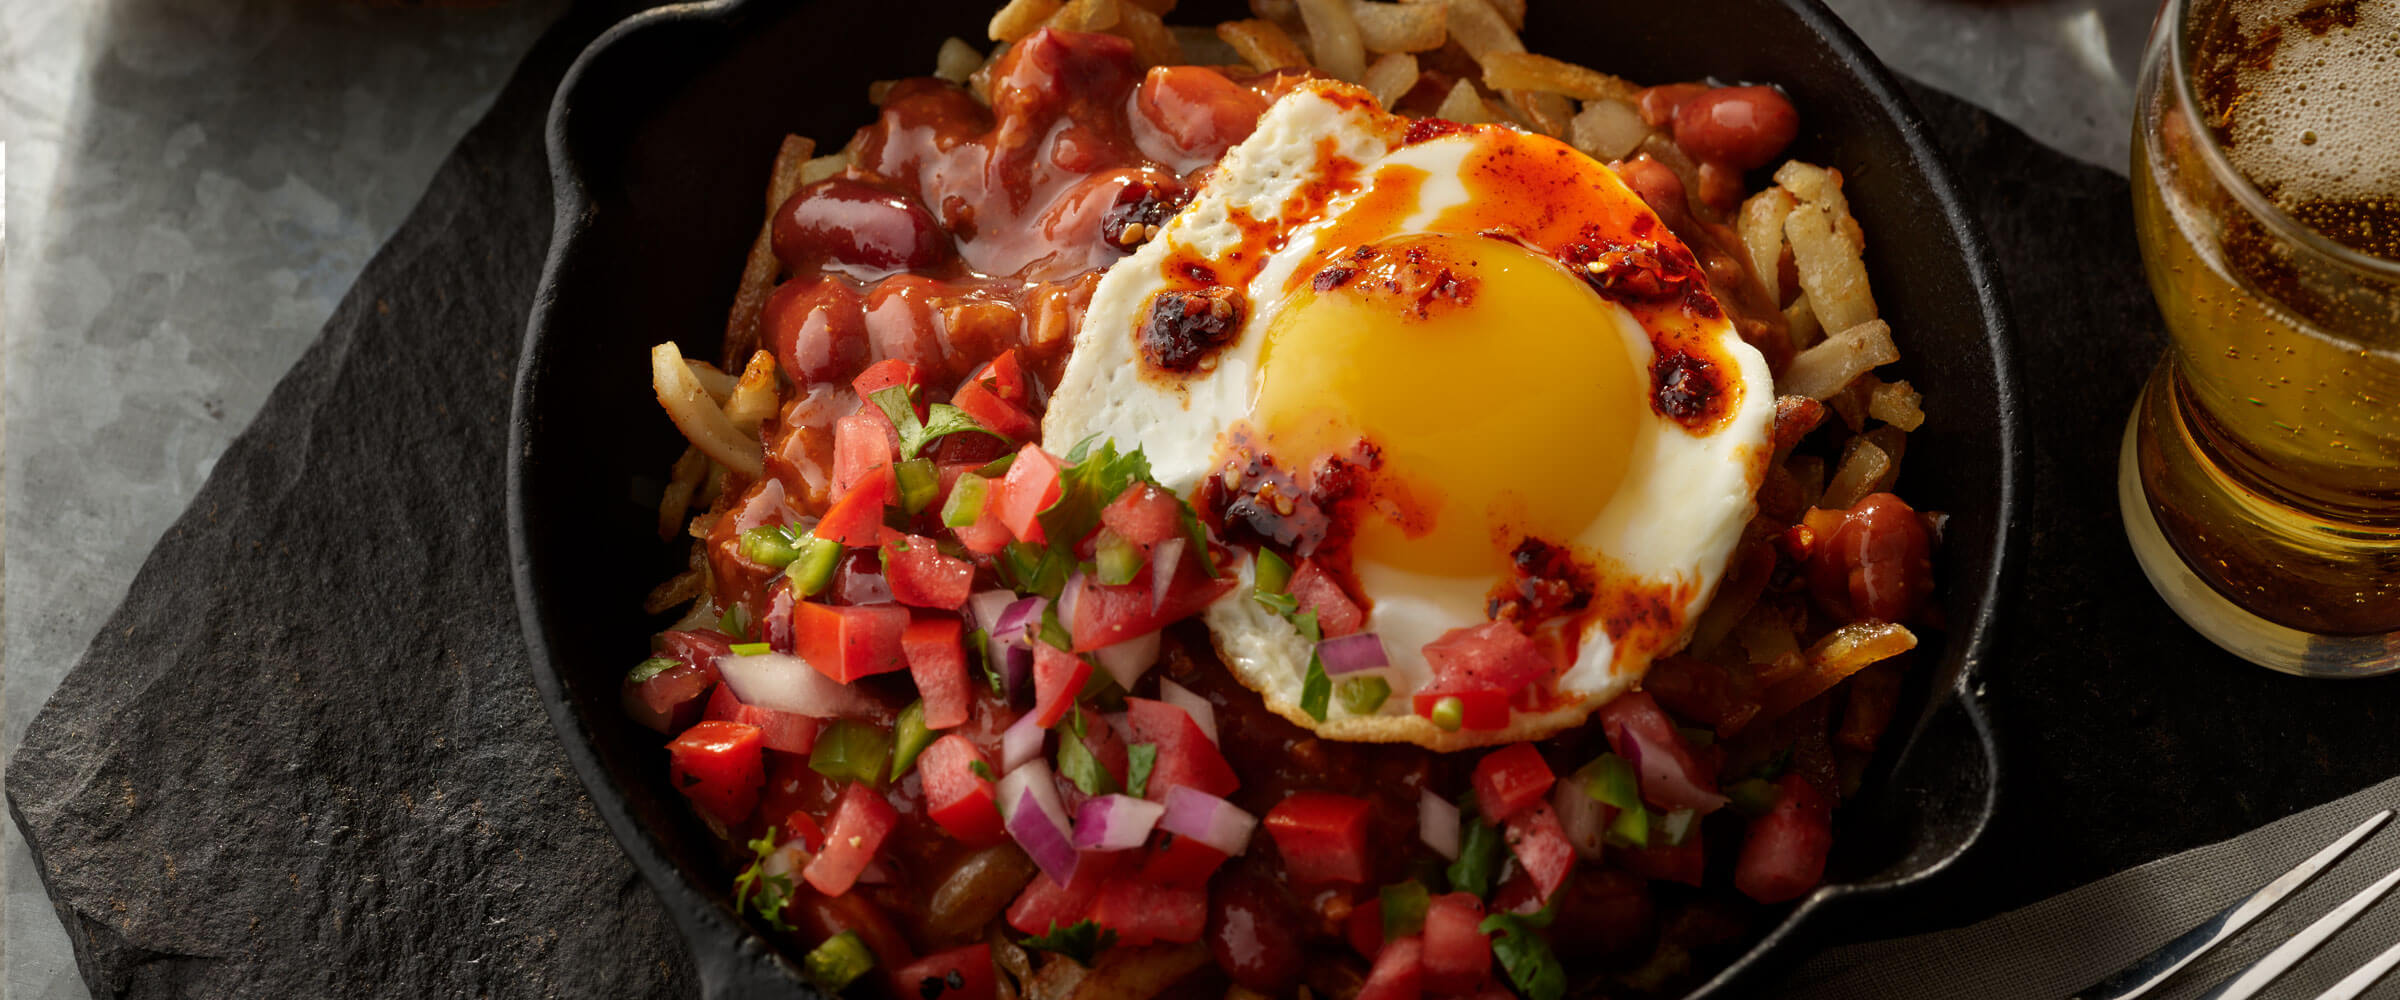 Chili Breakfast Bowl topped with egg, salsa and hot sauce in cast iron skillet